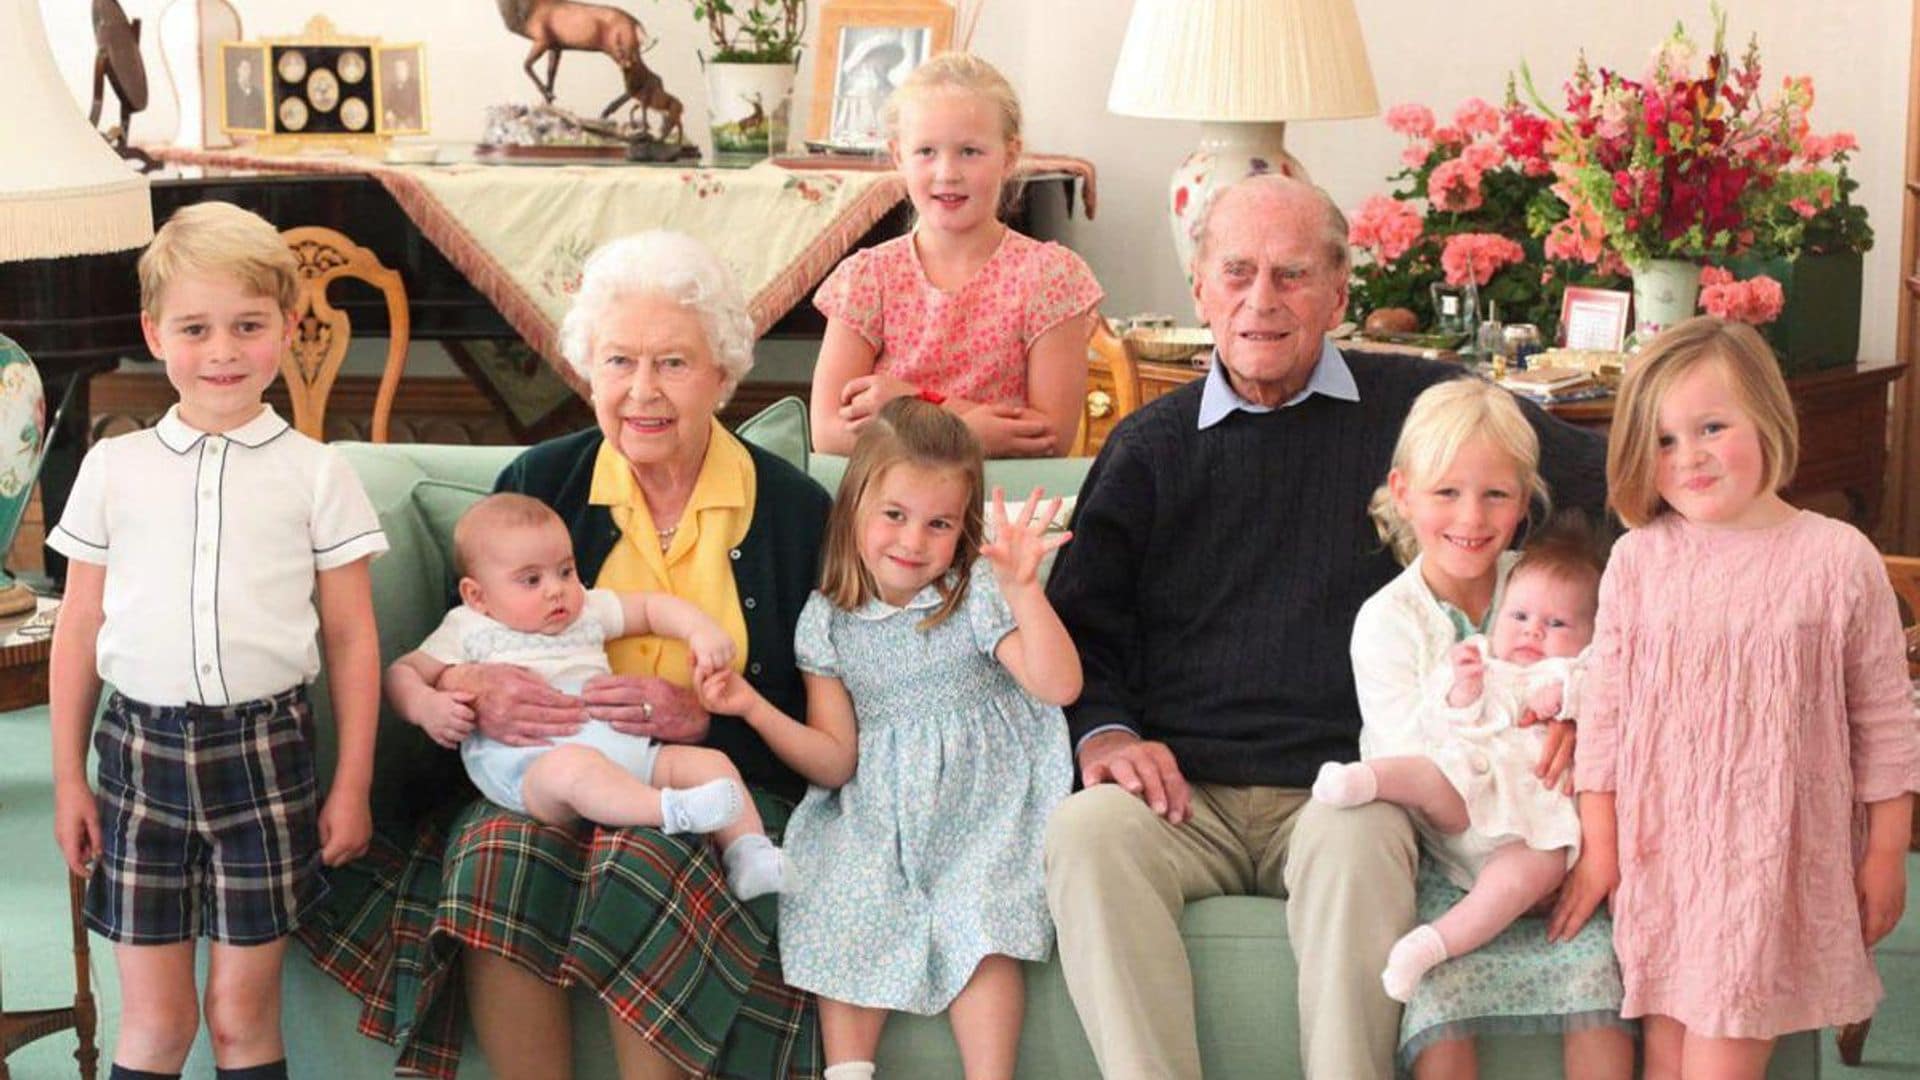 Ten of Queen Elizabeth's great-grandchildren will reportedly ride in a horse-drawn carriage at the Royal Windsor Horse Show's Platinum Jubilee Celebration